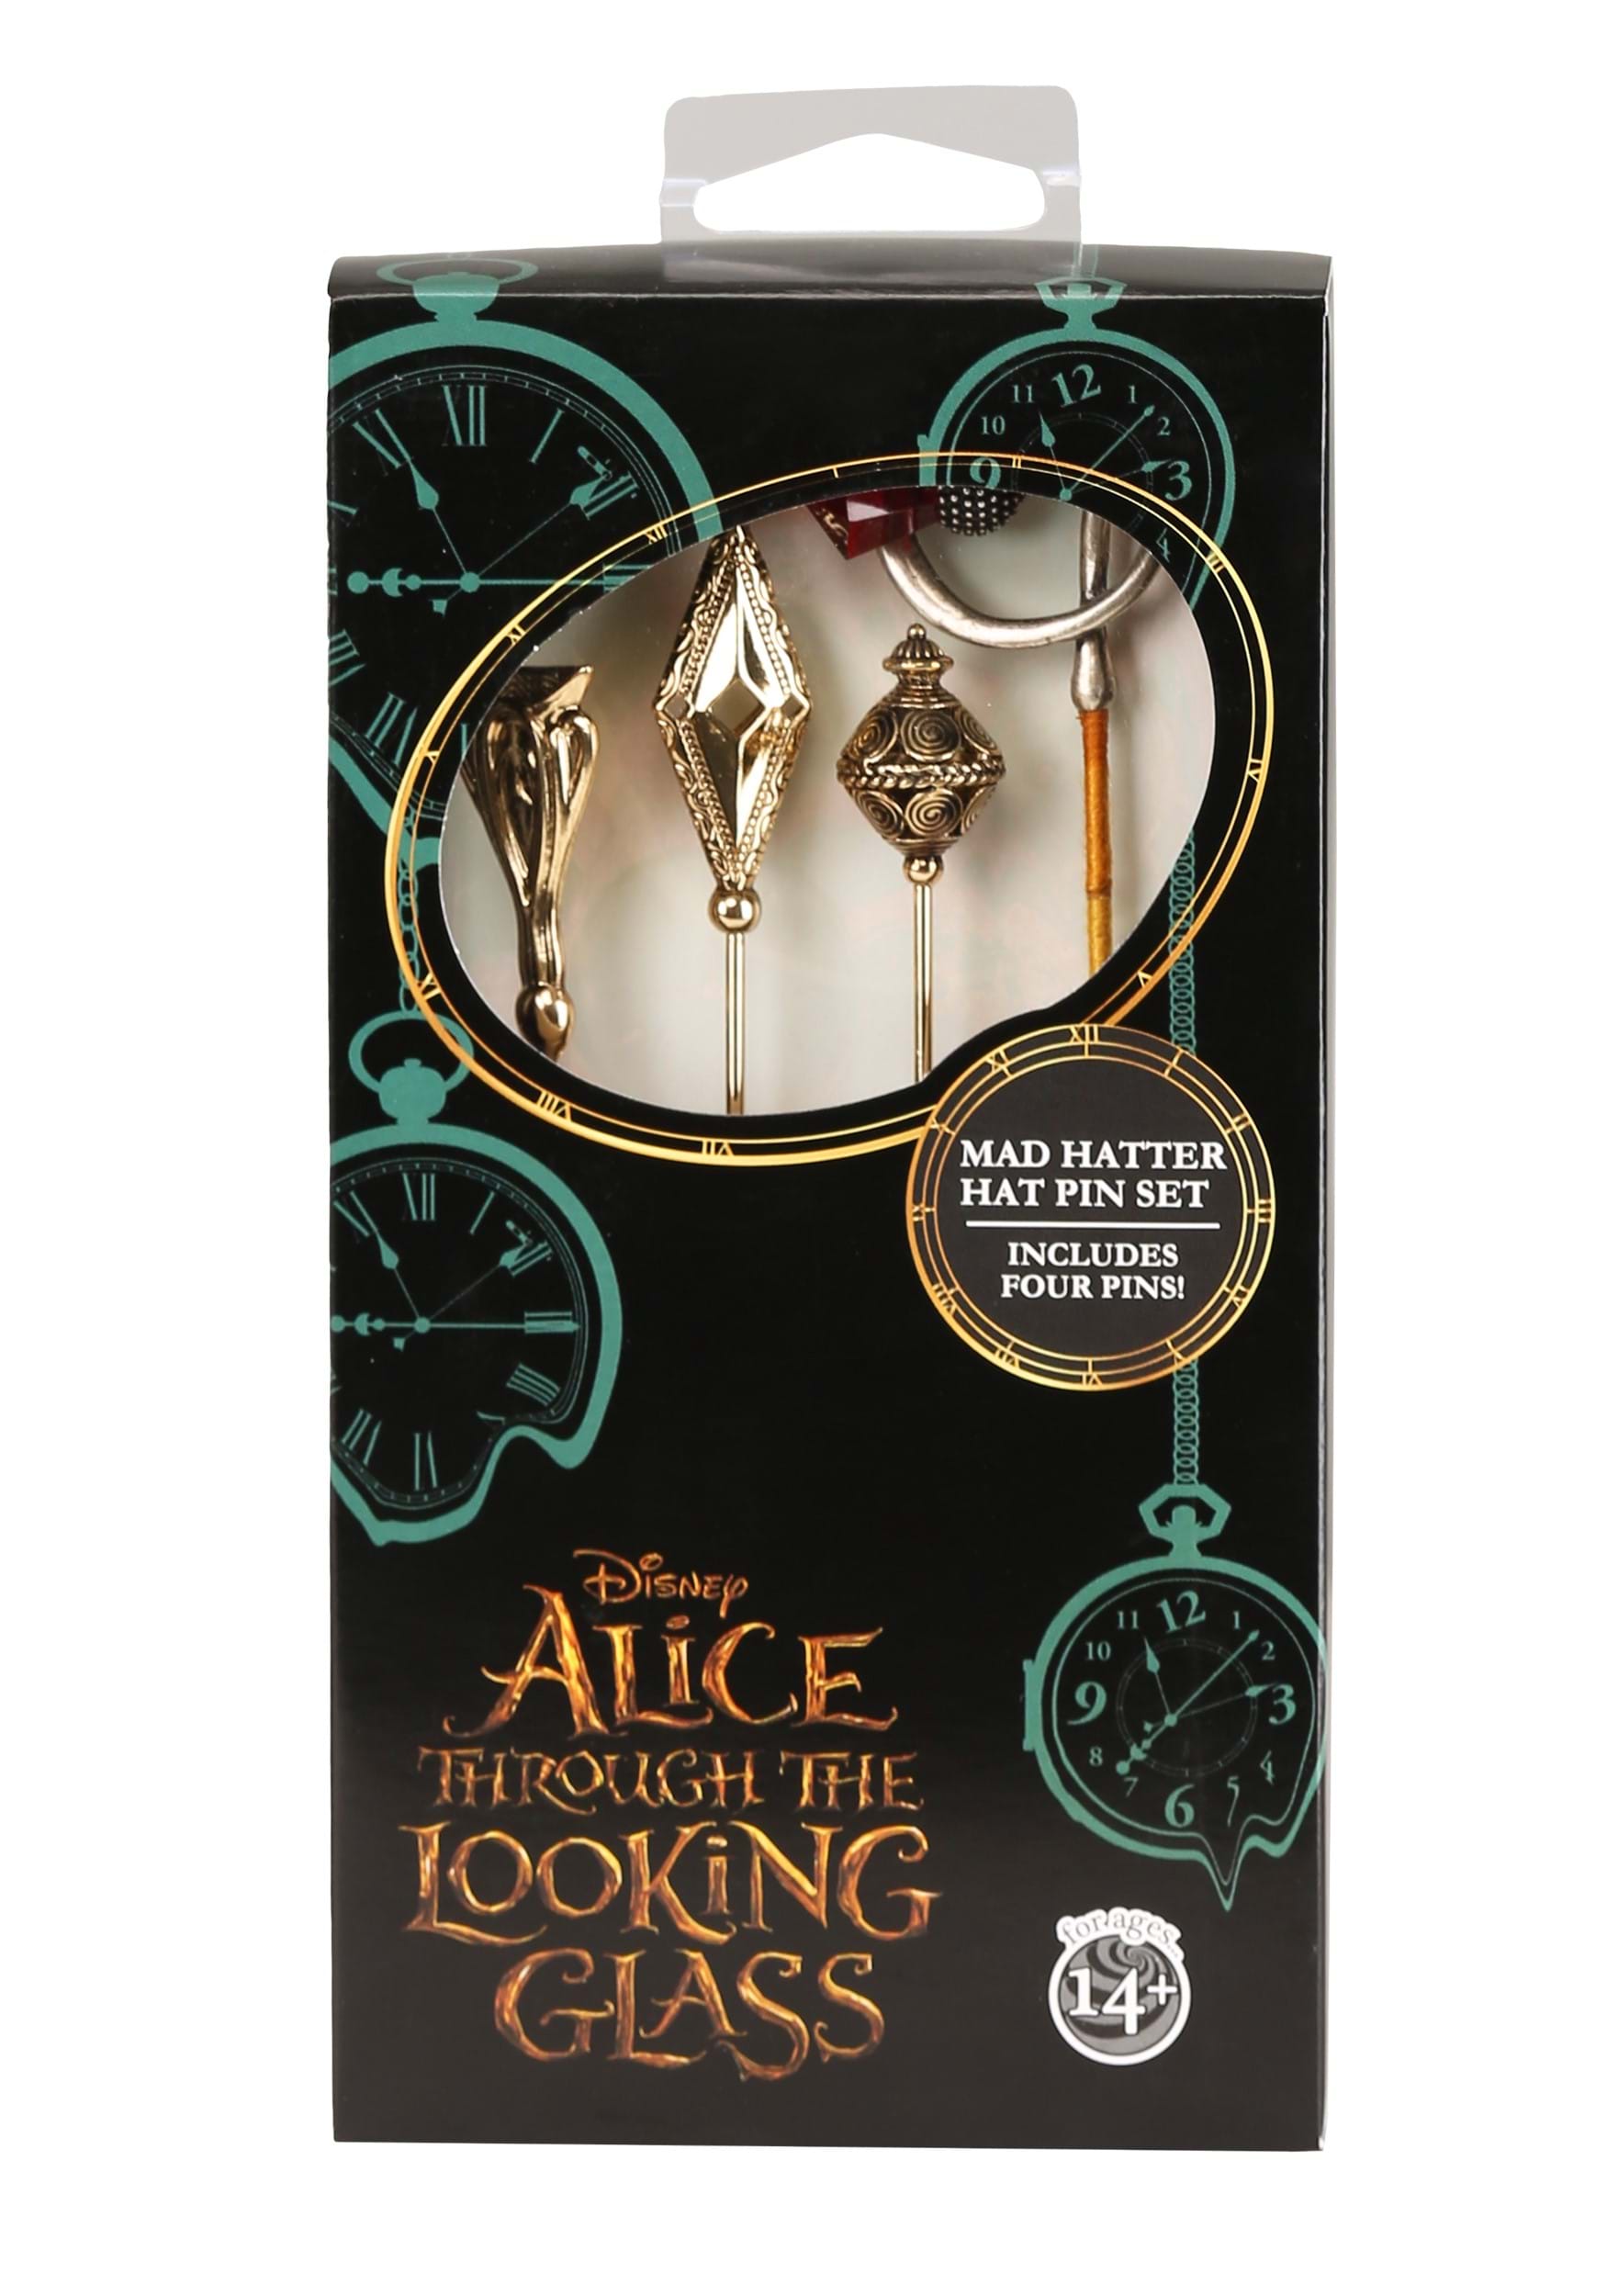 Mad Hatter Pin Set from Alice in Wonderland